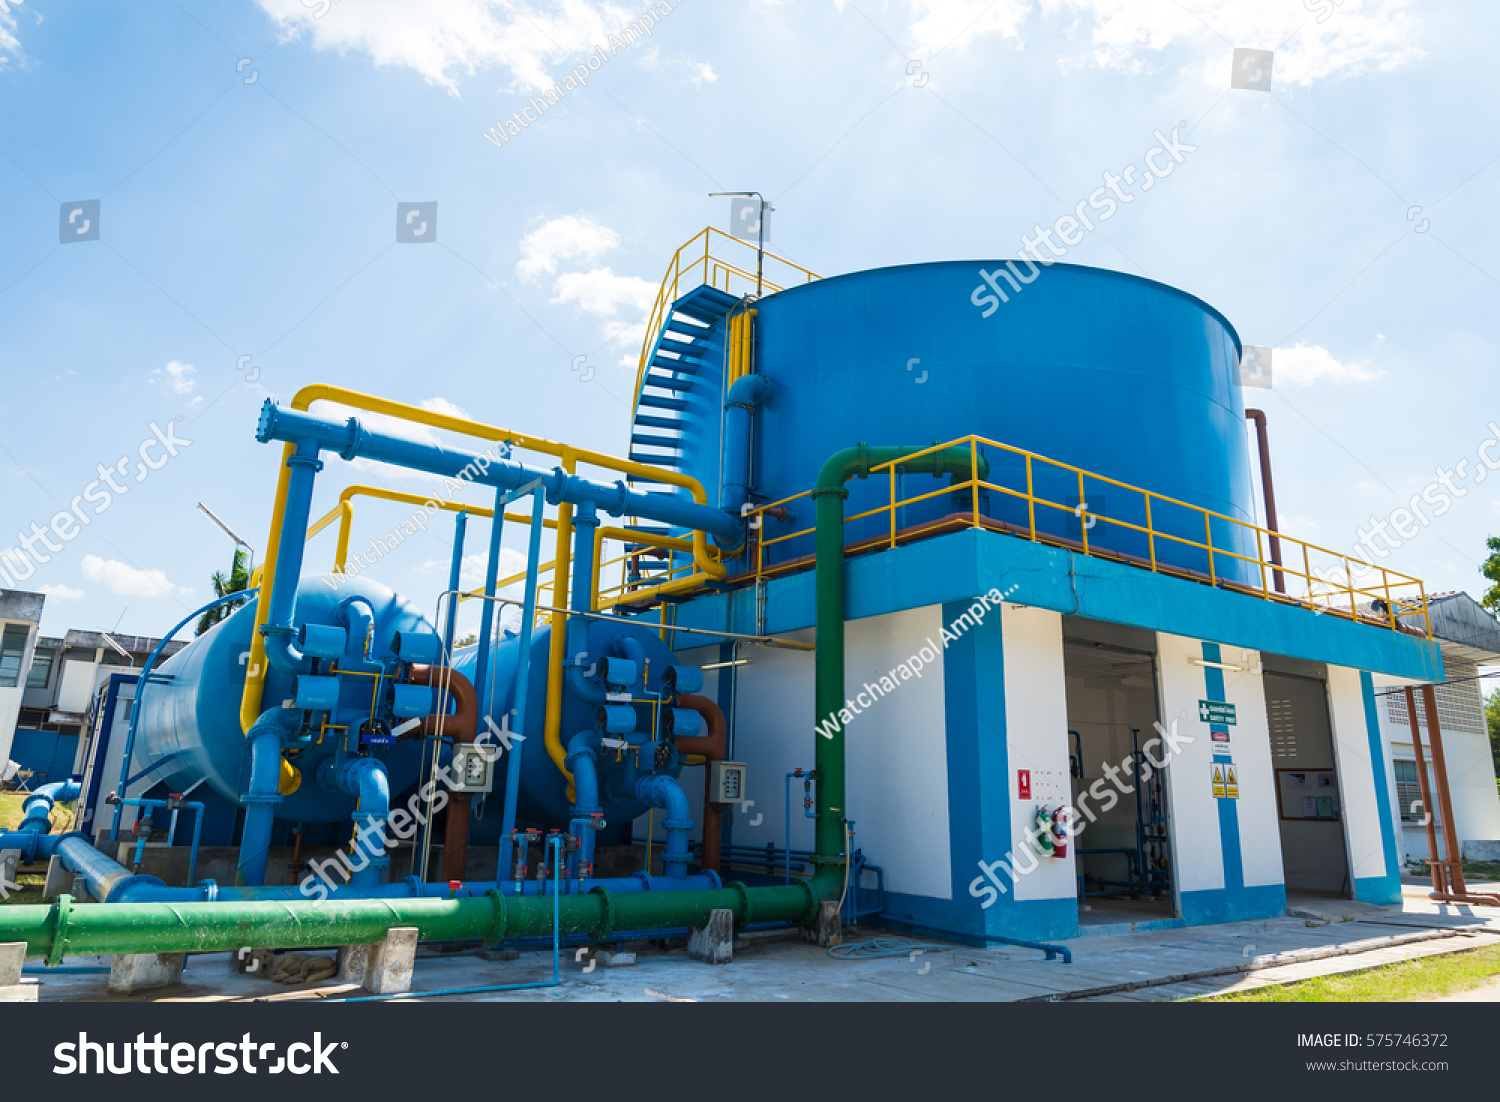 Water treatment process and Water treatment plants of the Waterworks in Thailand. #575746372